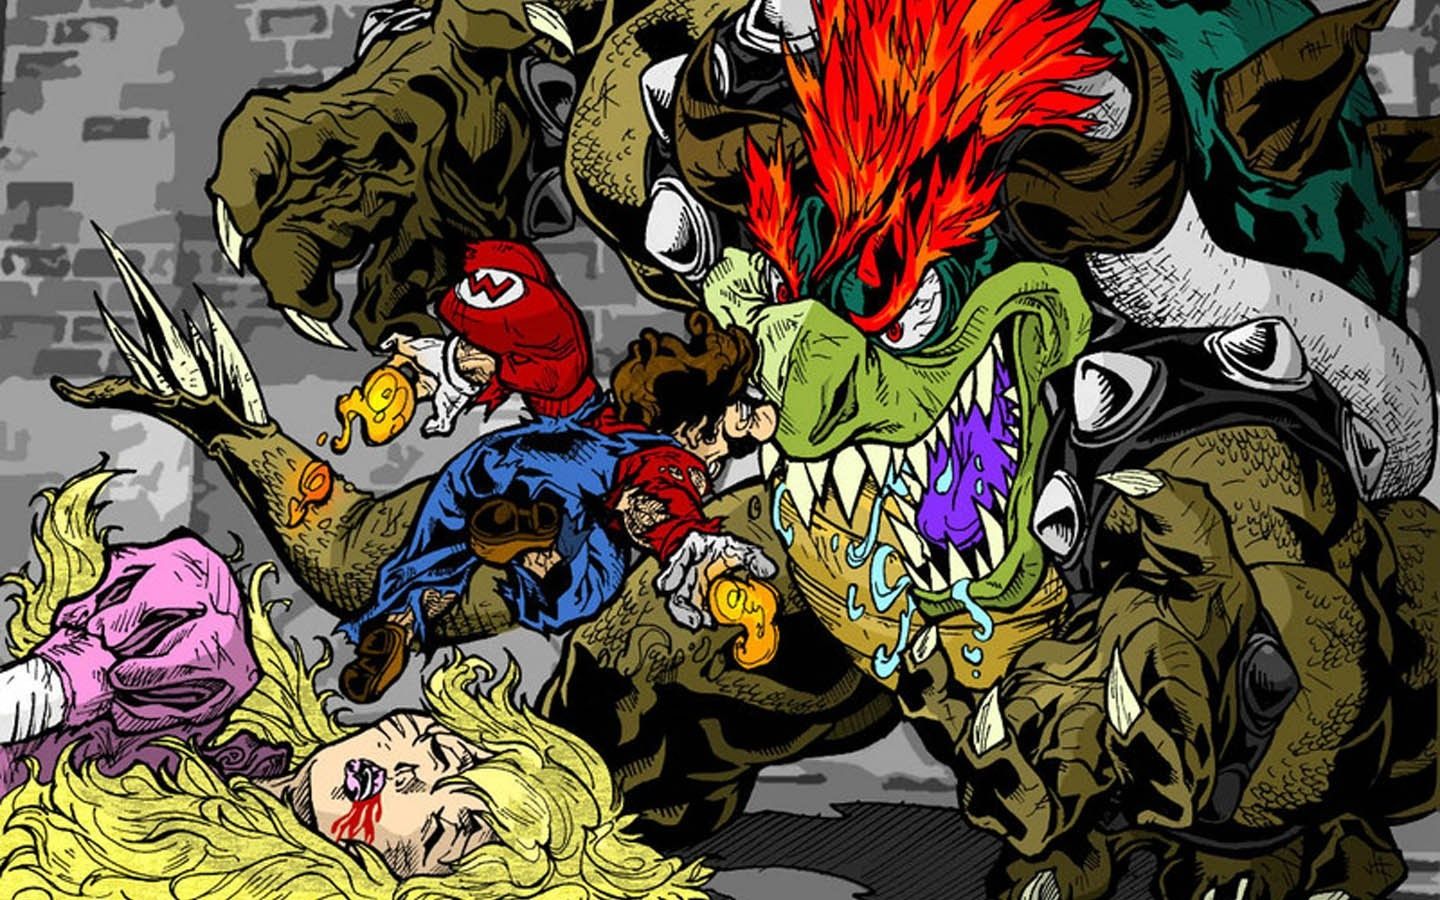 A group of characters from Super Mario games, including Mario, Bowser, and Princess Peach, are surrounded by monsters. - Bowser